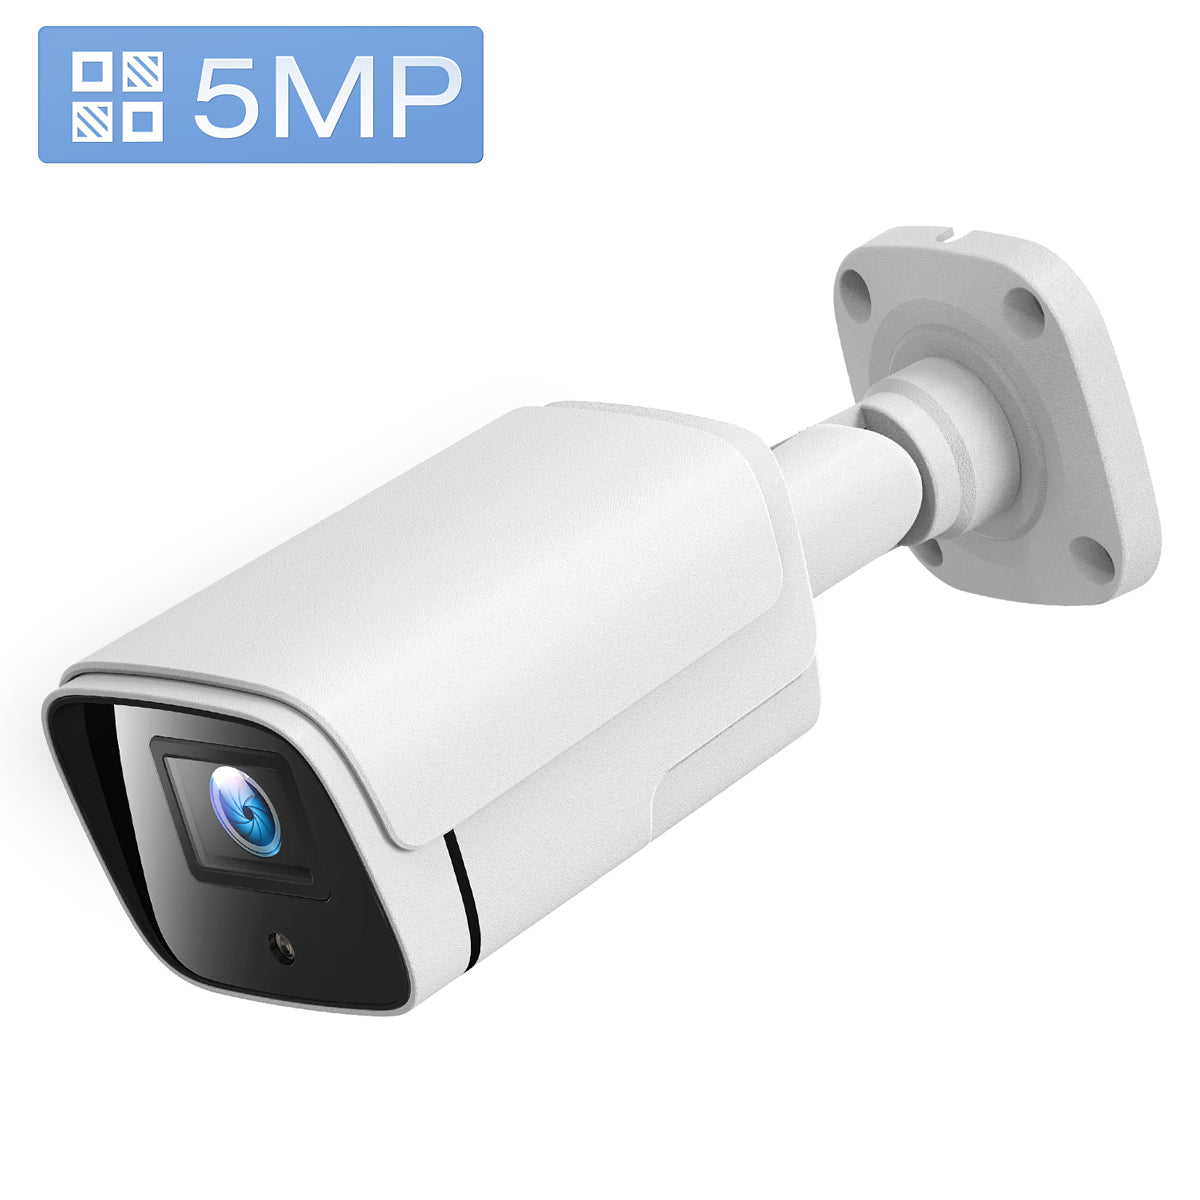 A Single POE Security Camera For Campark W504 Security Camera System